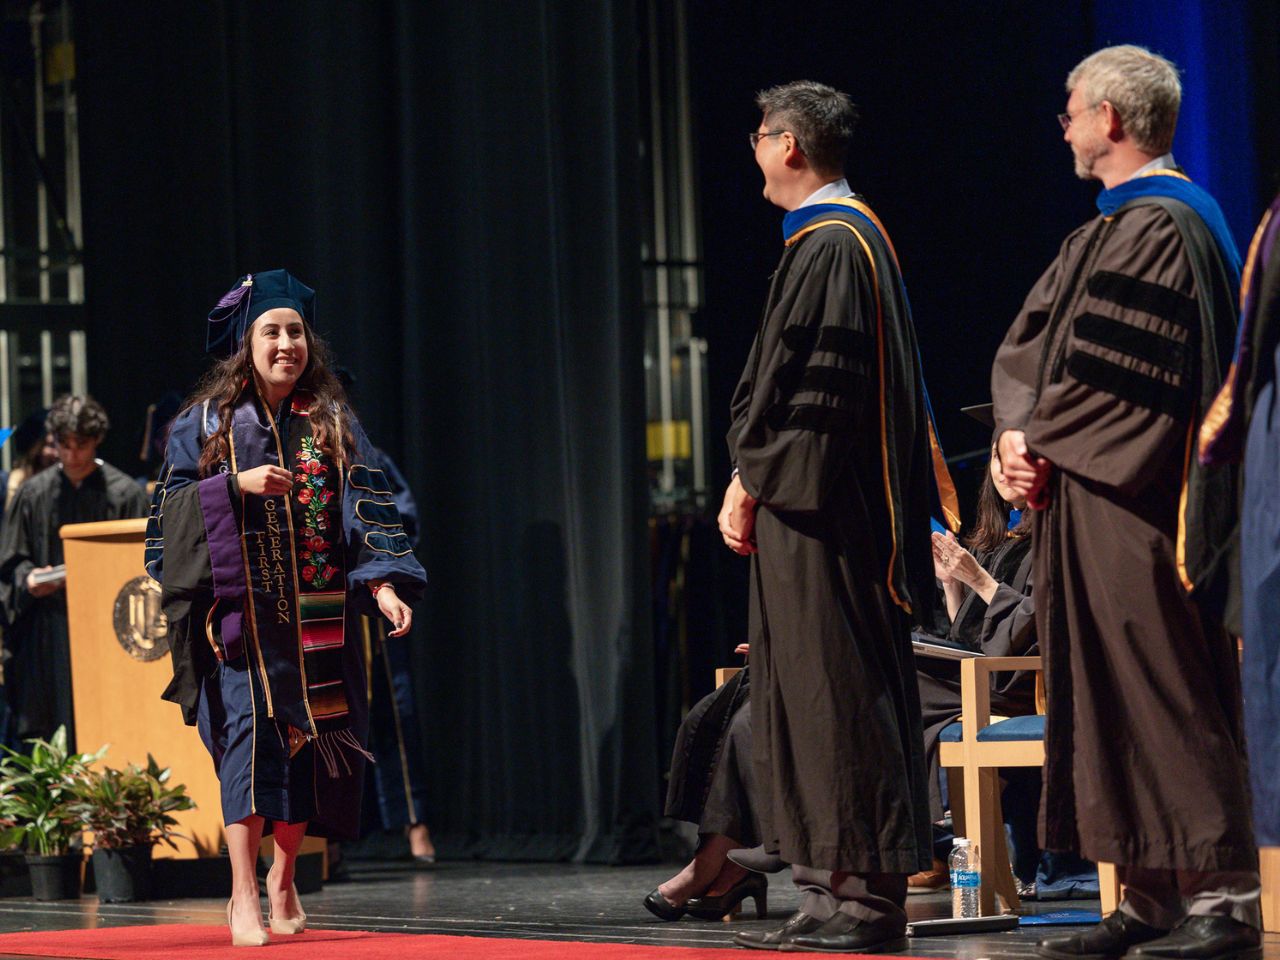 A student in a blue commencement gown and regalia, including a stole with the words "First Generation" walks across the stage at the UC Davis School of Law commencement ceremony.